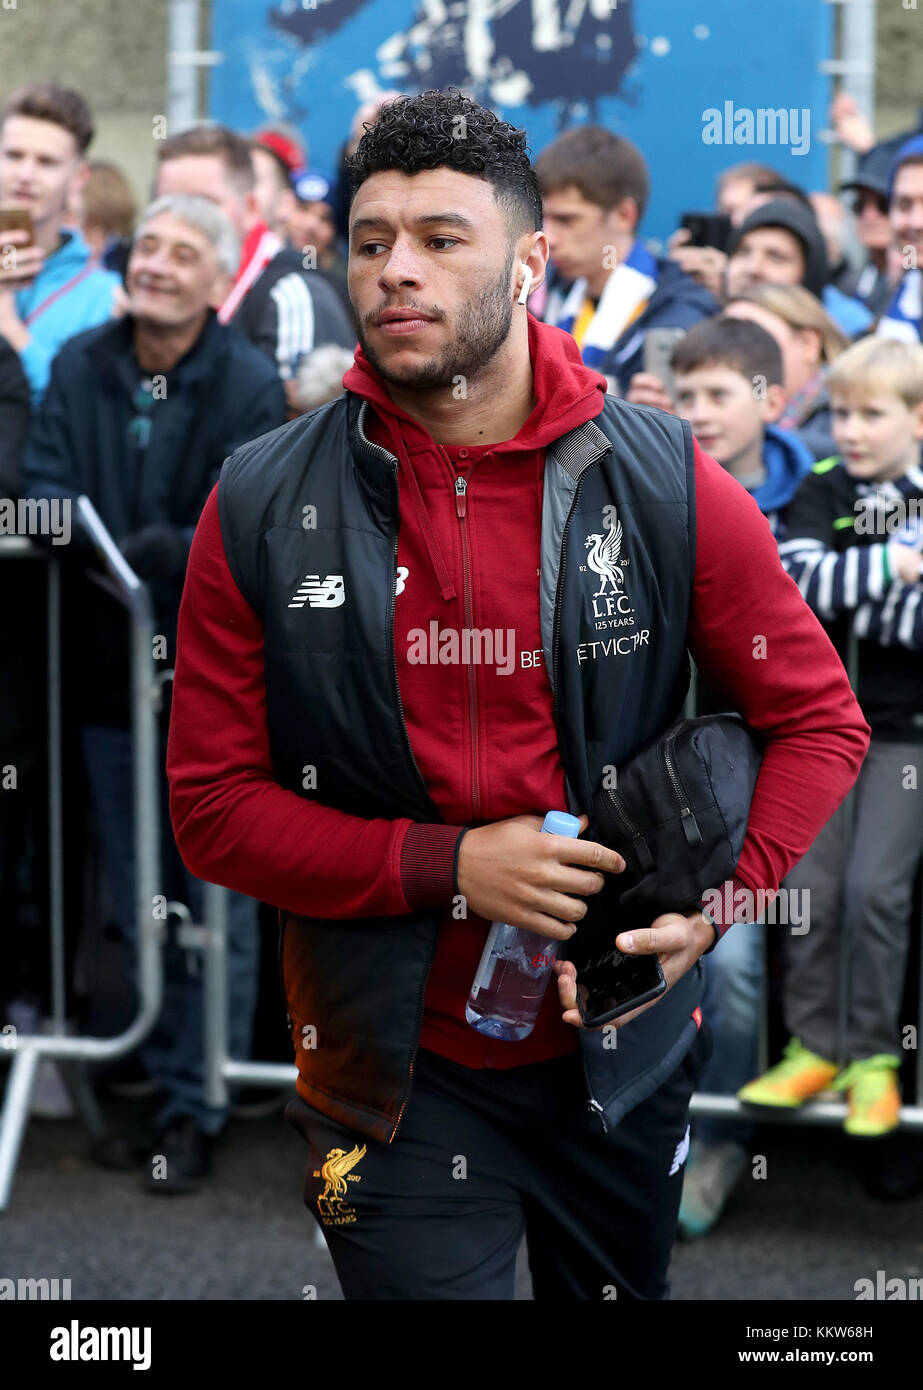 Liverpool's Alex Oxlade-Chamberlain arriving before the Premier League match at the AMEX Stadium, Brighton. PRESS ASSOCIATION Photo Picture date: Saturday December 2, 2017. See PA story SOCCER Brighton. Photo credit should read: Gareth Fuller/PA Wire. RESTRICTIONS: No use with unauthorised audio, video, data, fixture lists, club/league logos or 'live' services. Online in-match use limited to 75 images, no video emulation. No use in betting, games or single club/league/player publications. Stock Photo